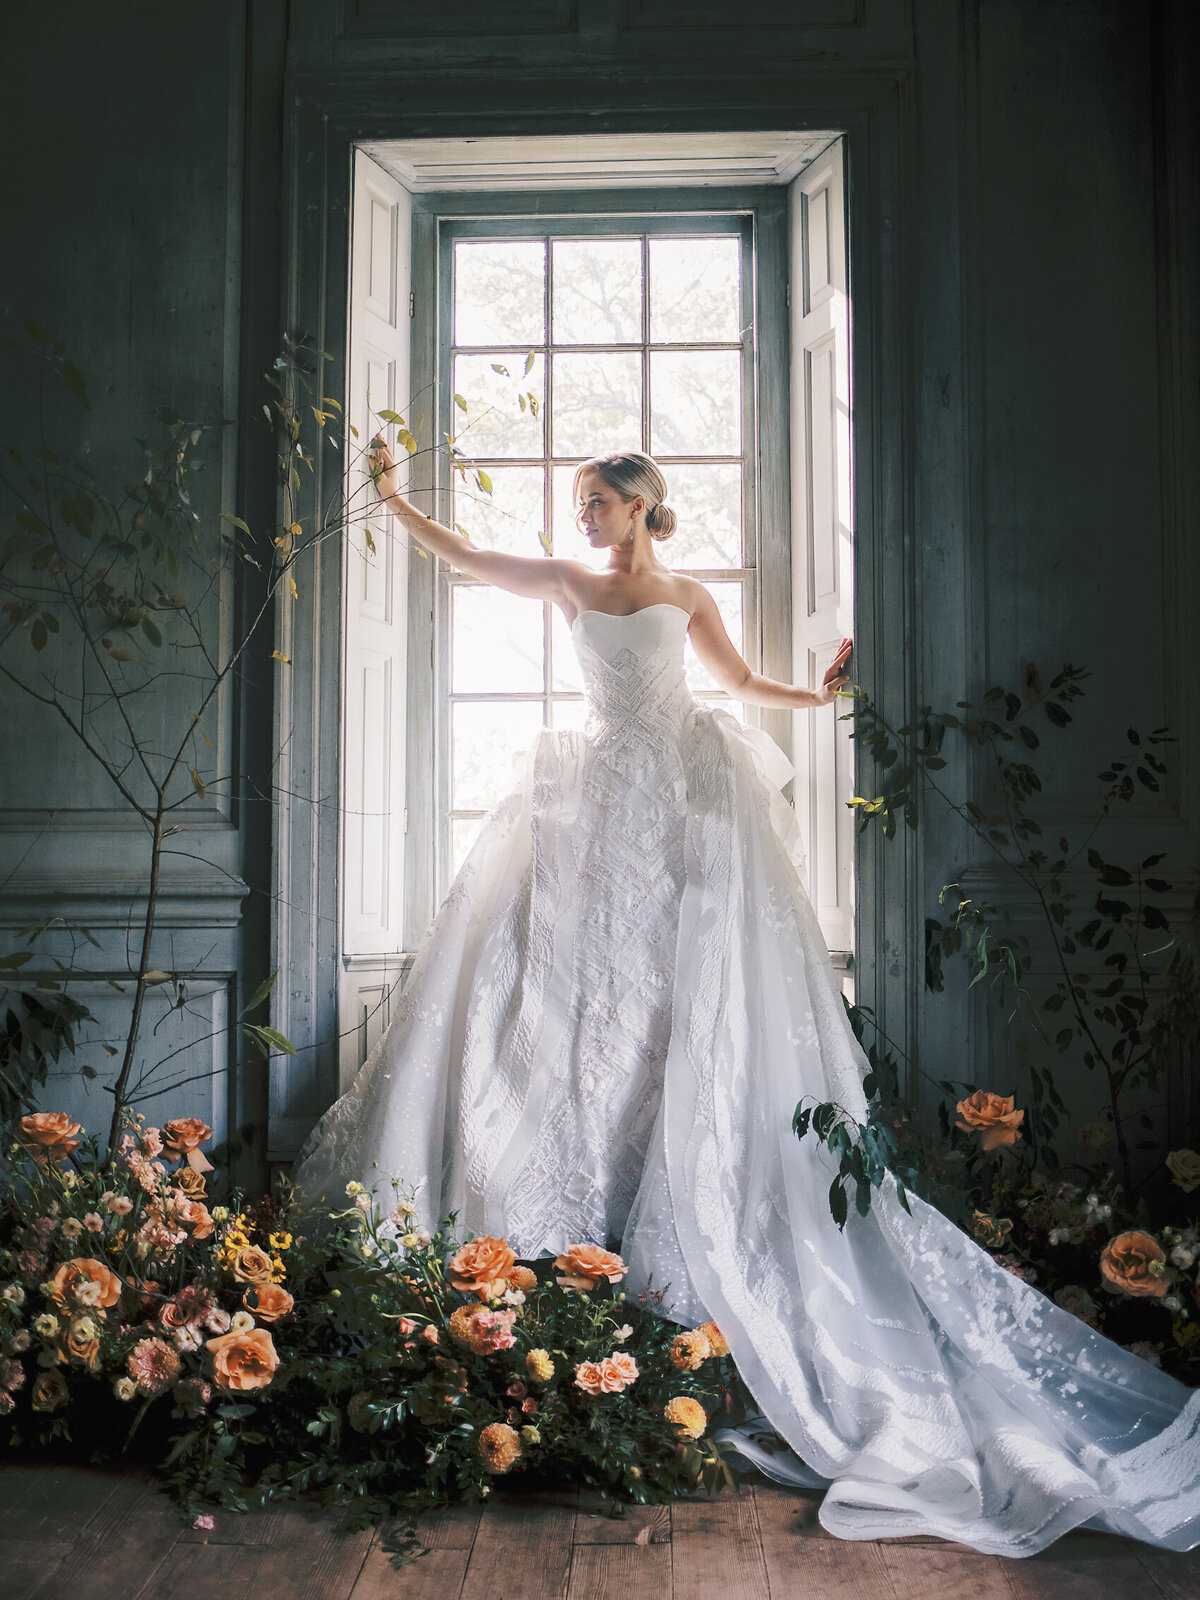 Jenny-Haas-Photography-Luxury-DC-Planner-Prof-Jimmy-Choo-Wedding-Gown-Luxe-Editorial